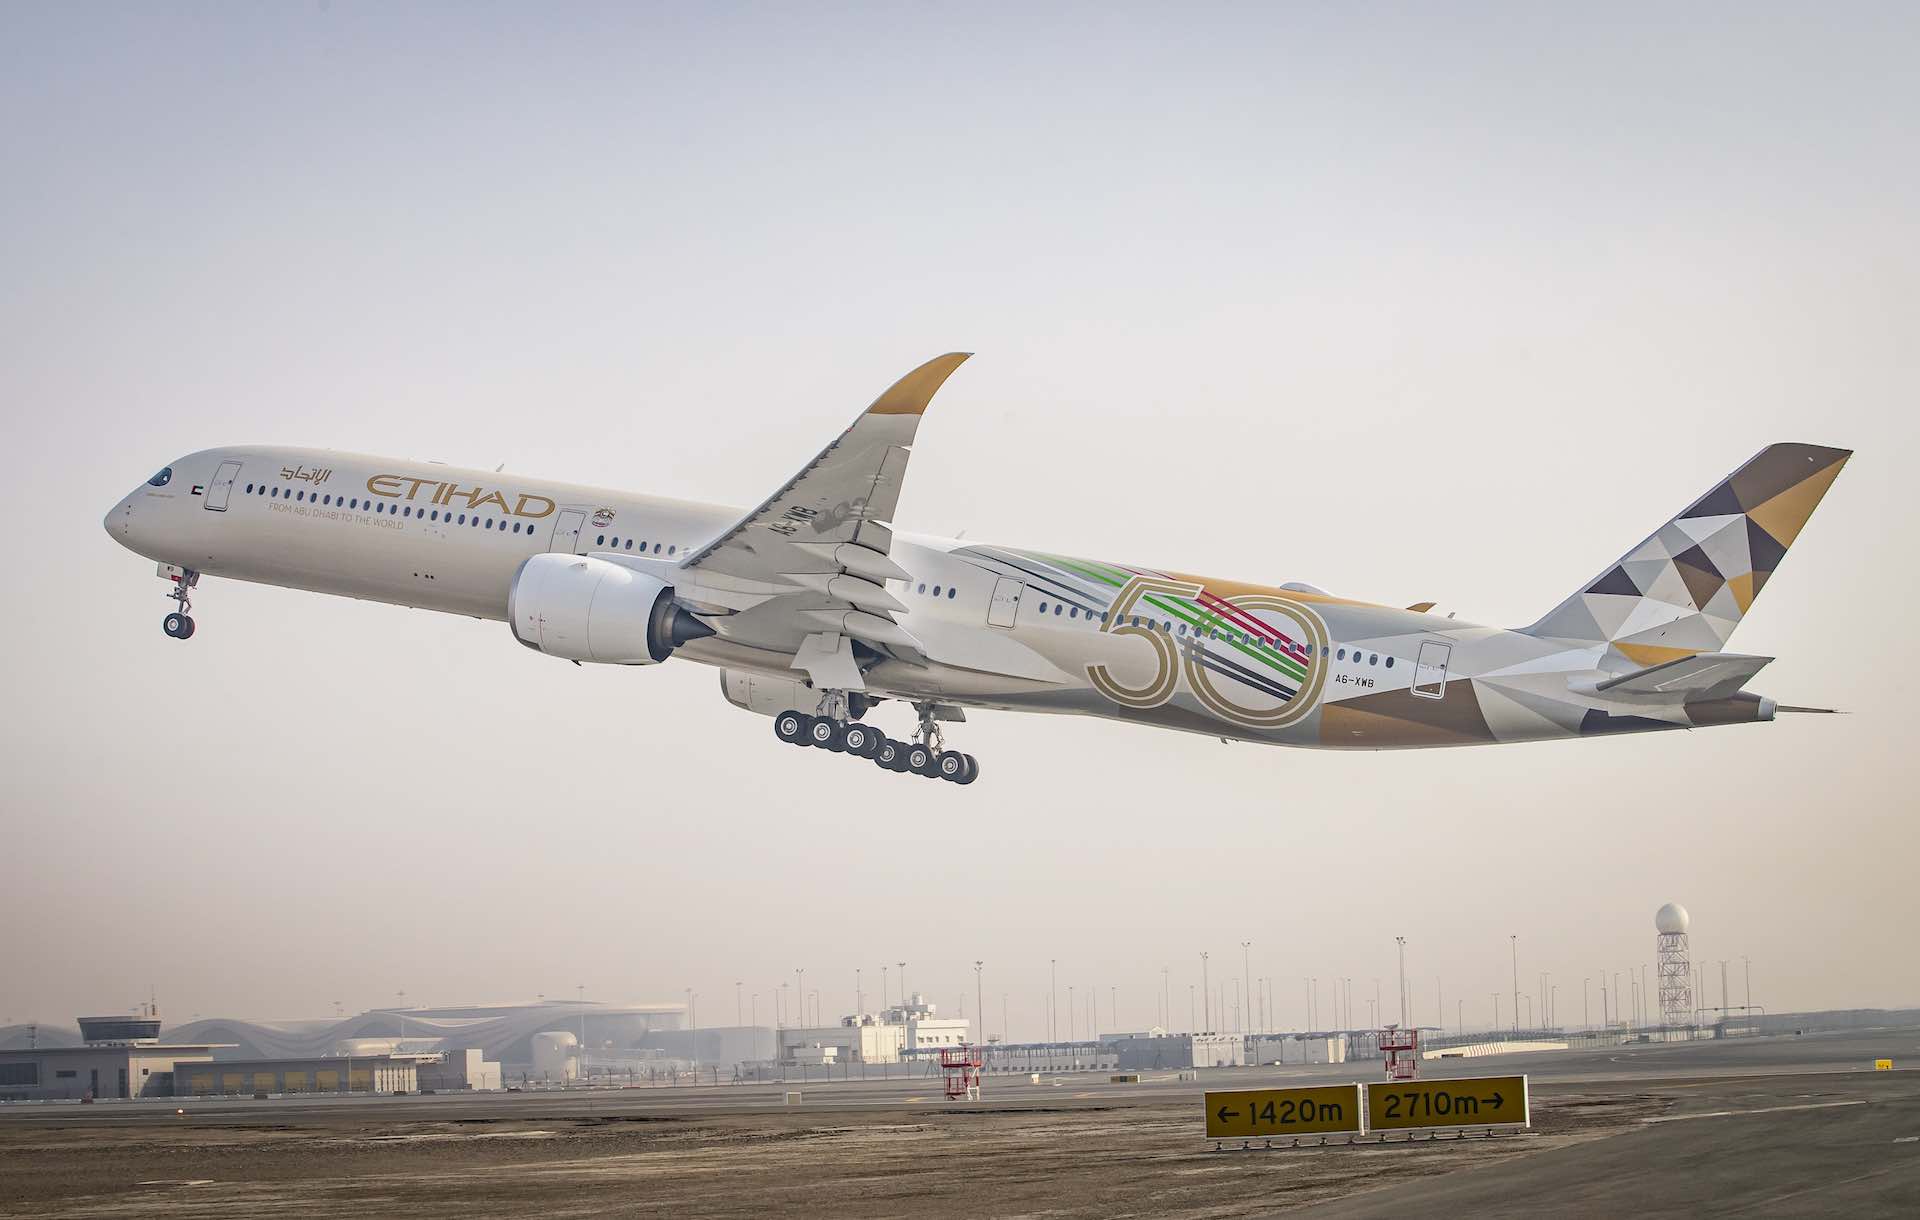 Record-breaking profit for Etihad Airways in the first half of 2022